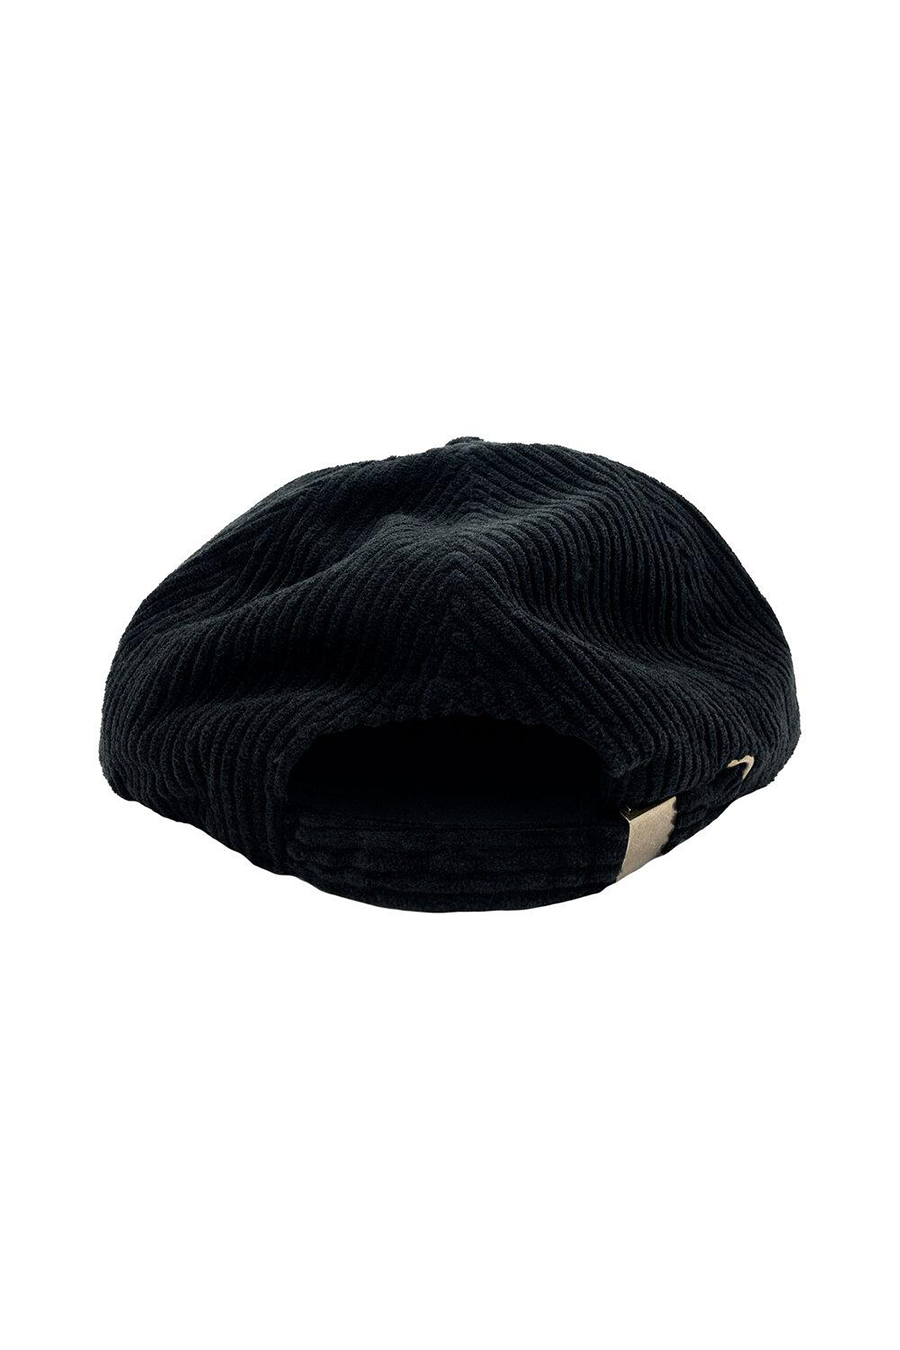 Don't Trip Fat Corduroy Hat | Black - Main Image Number 2 of 2